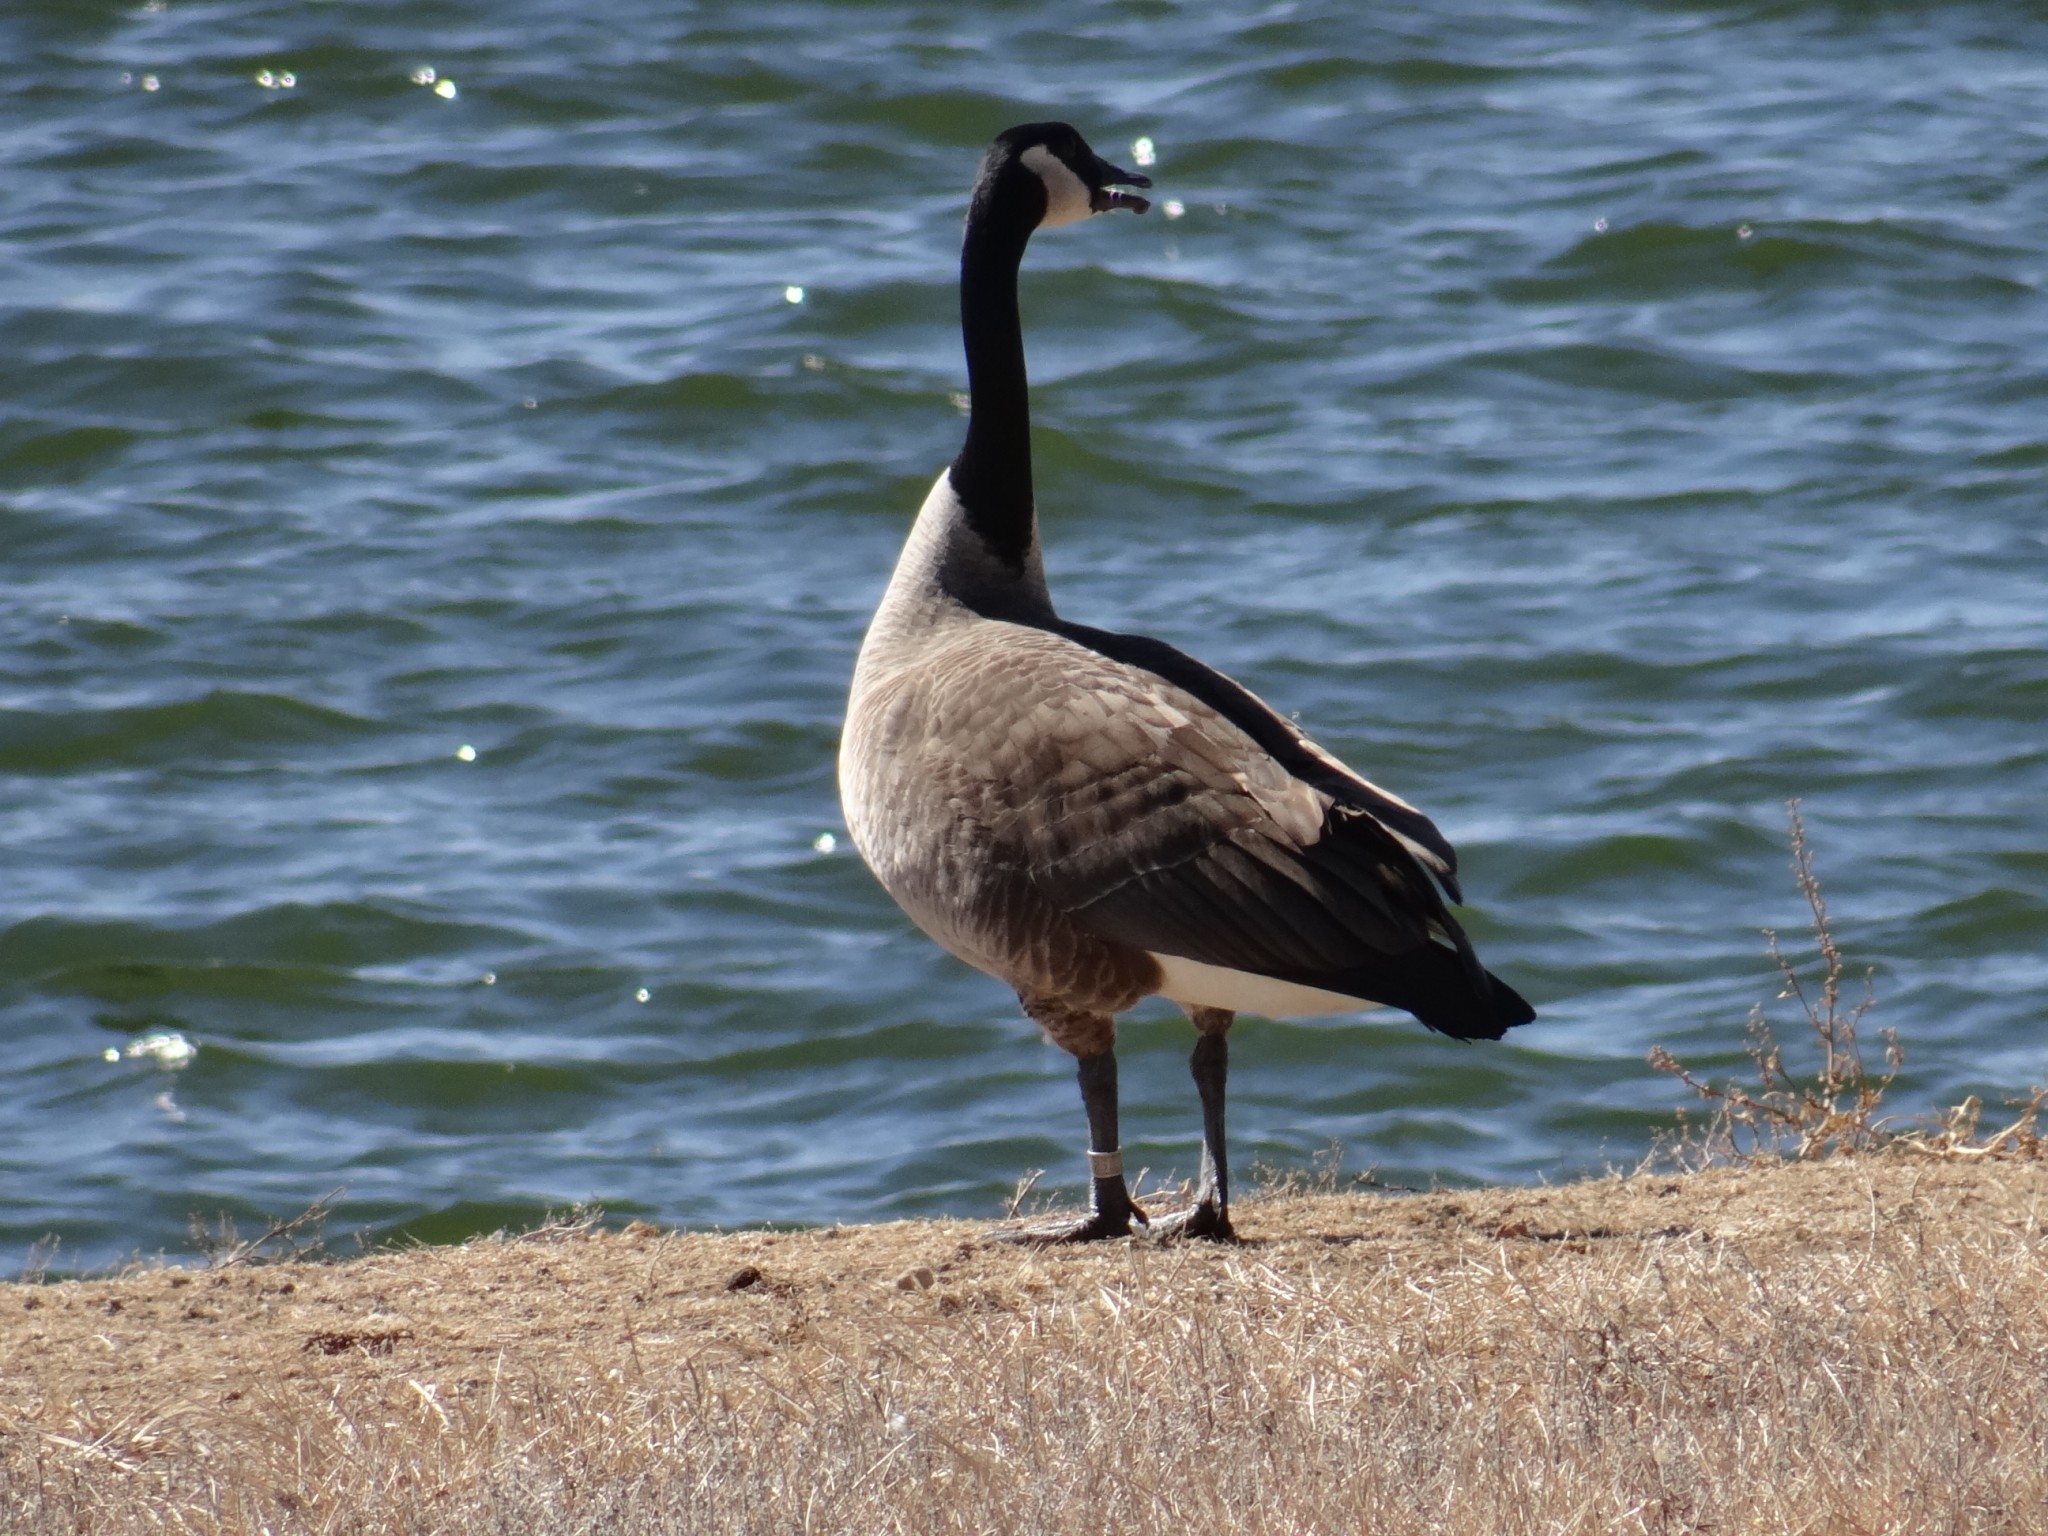 Banded Canada goose. Photo by Greg Wagner.